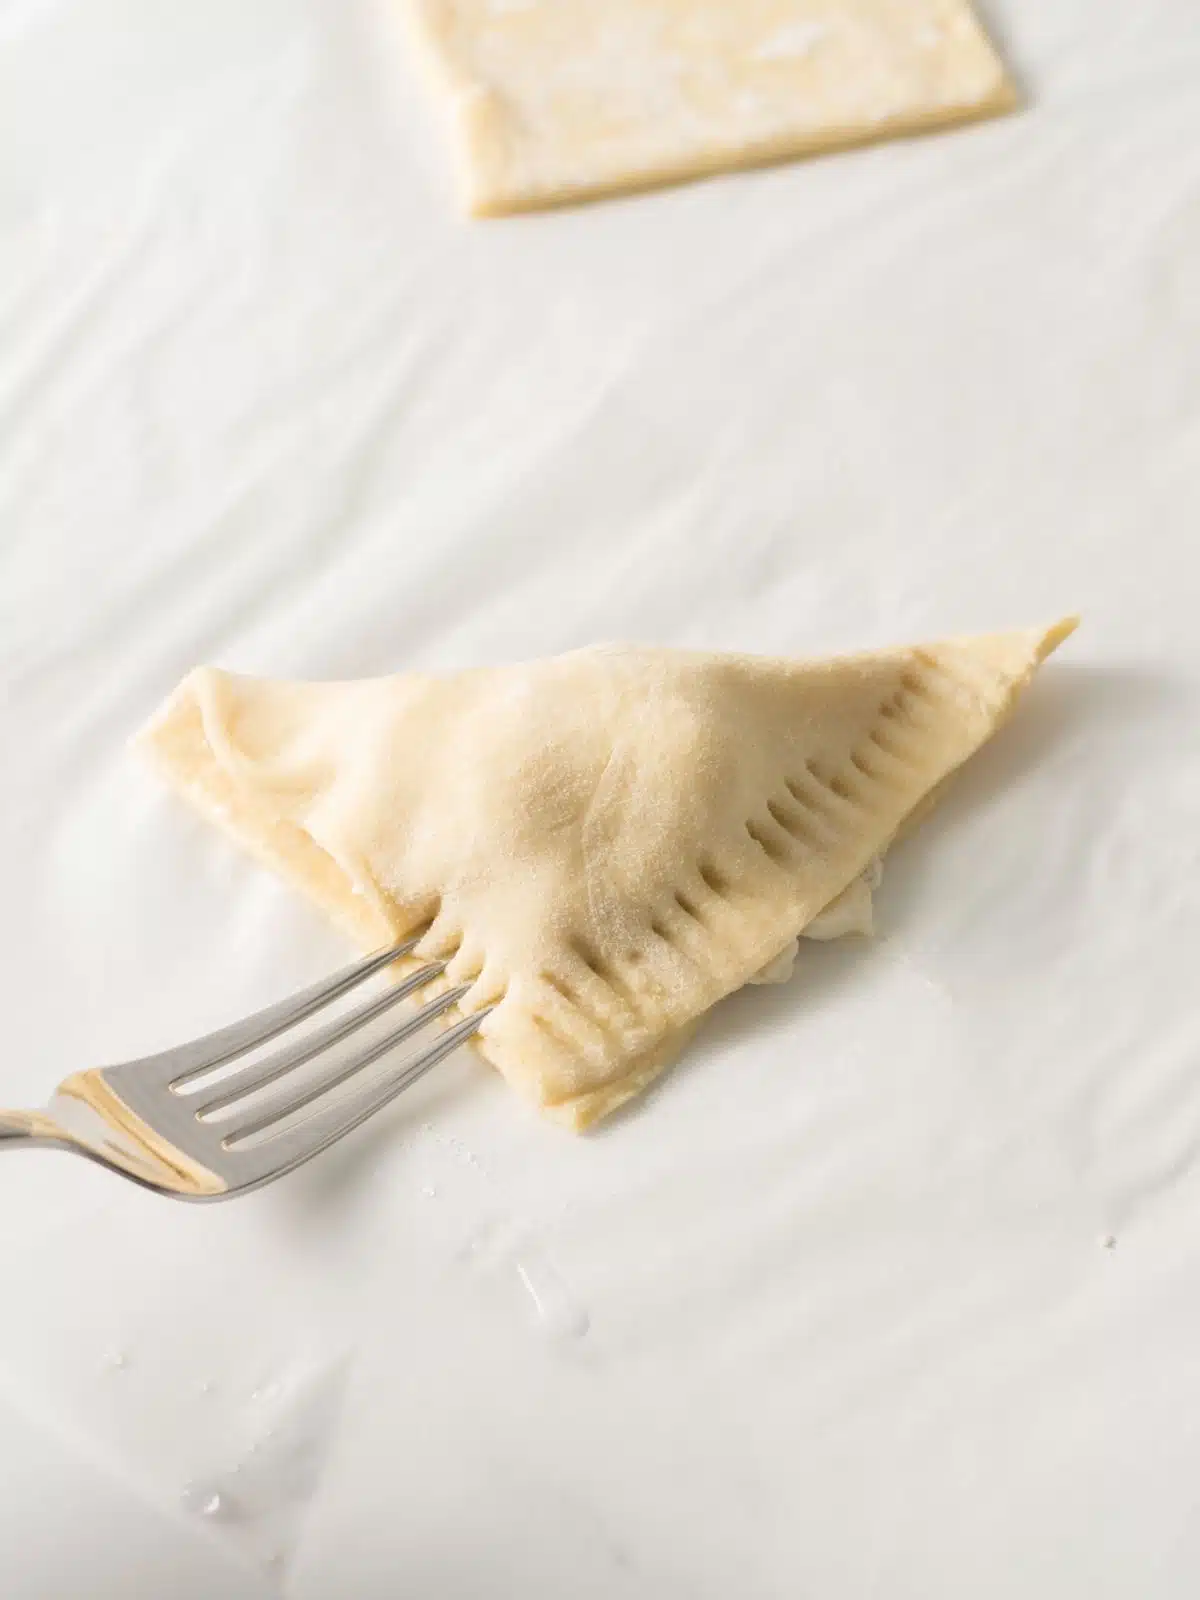 puff pastry folded into a triangle with a fork crimping the edges to seal in the filling.